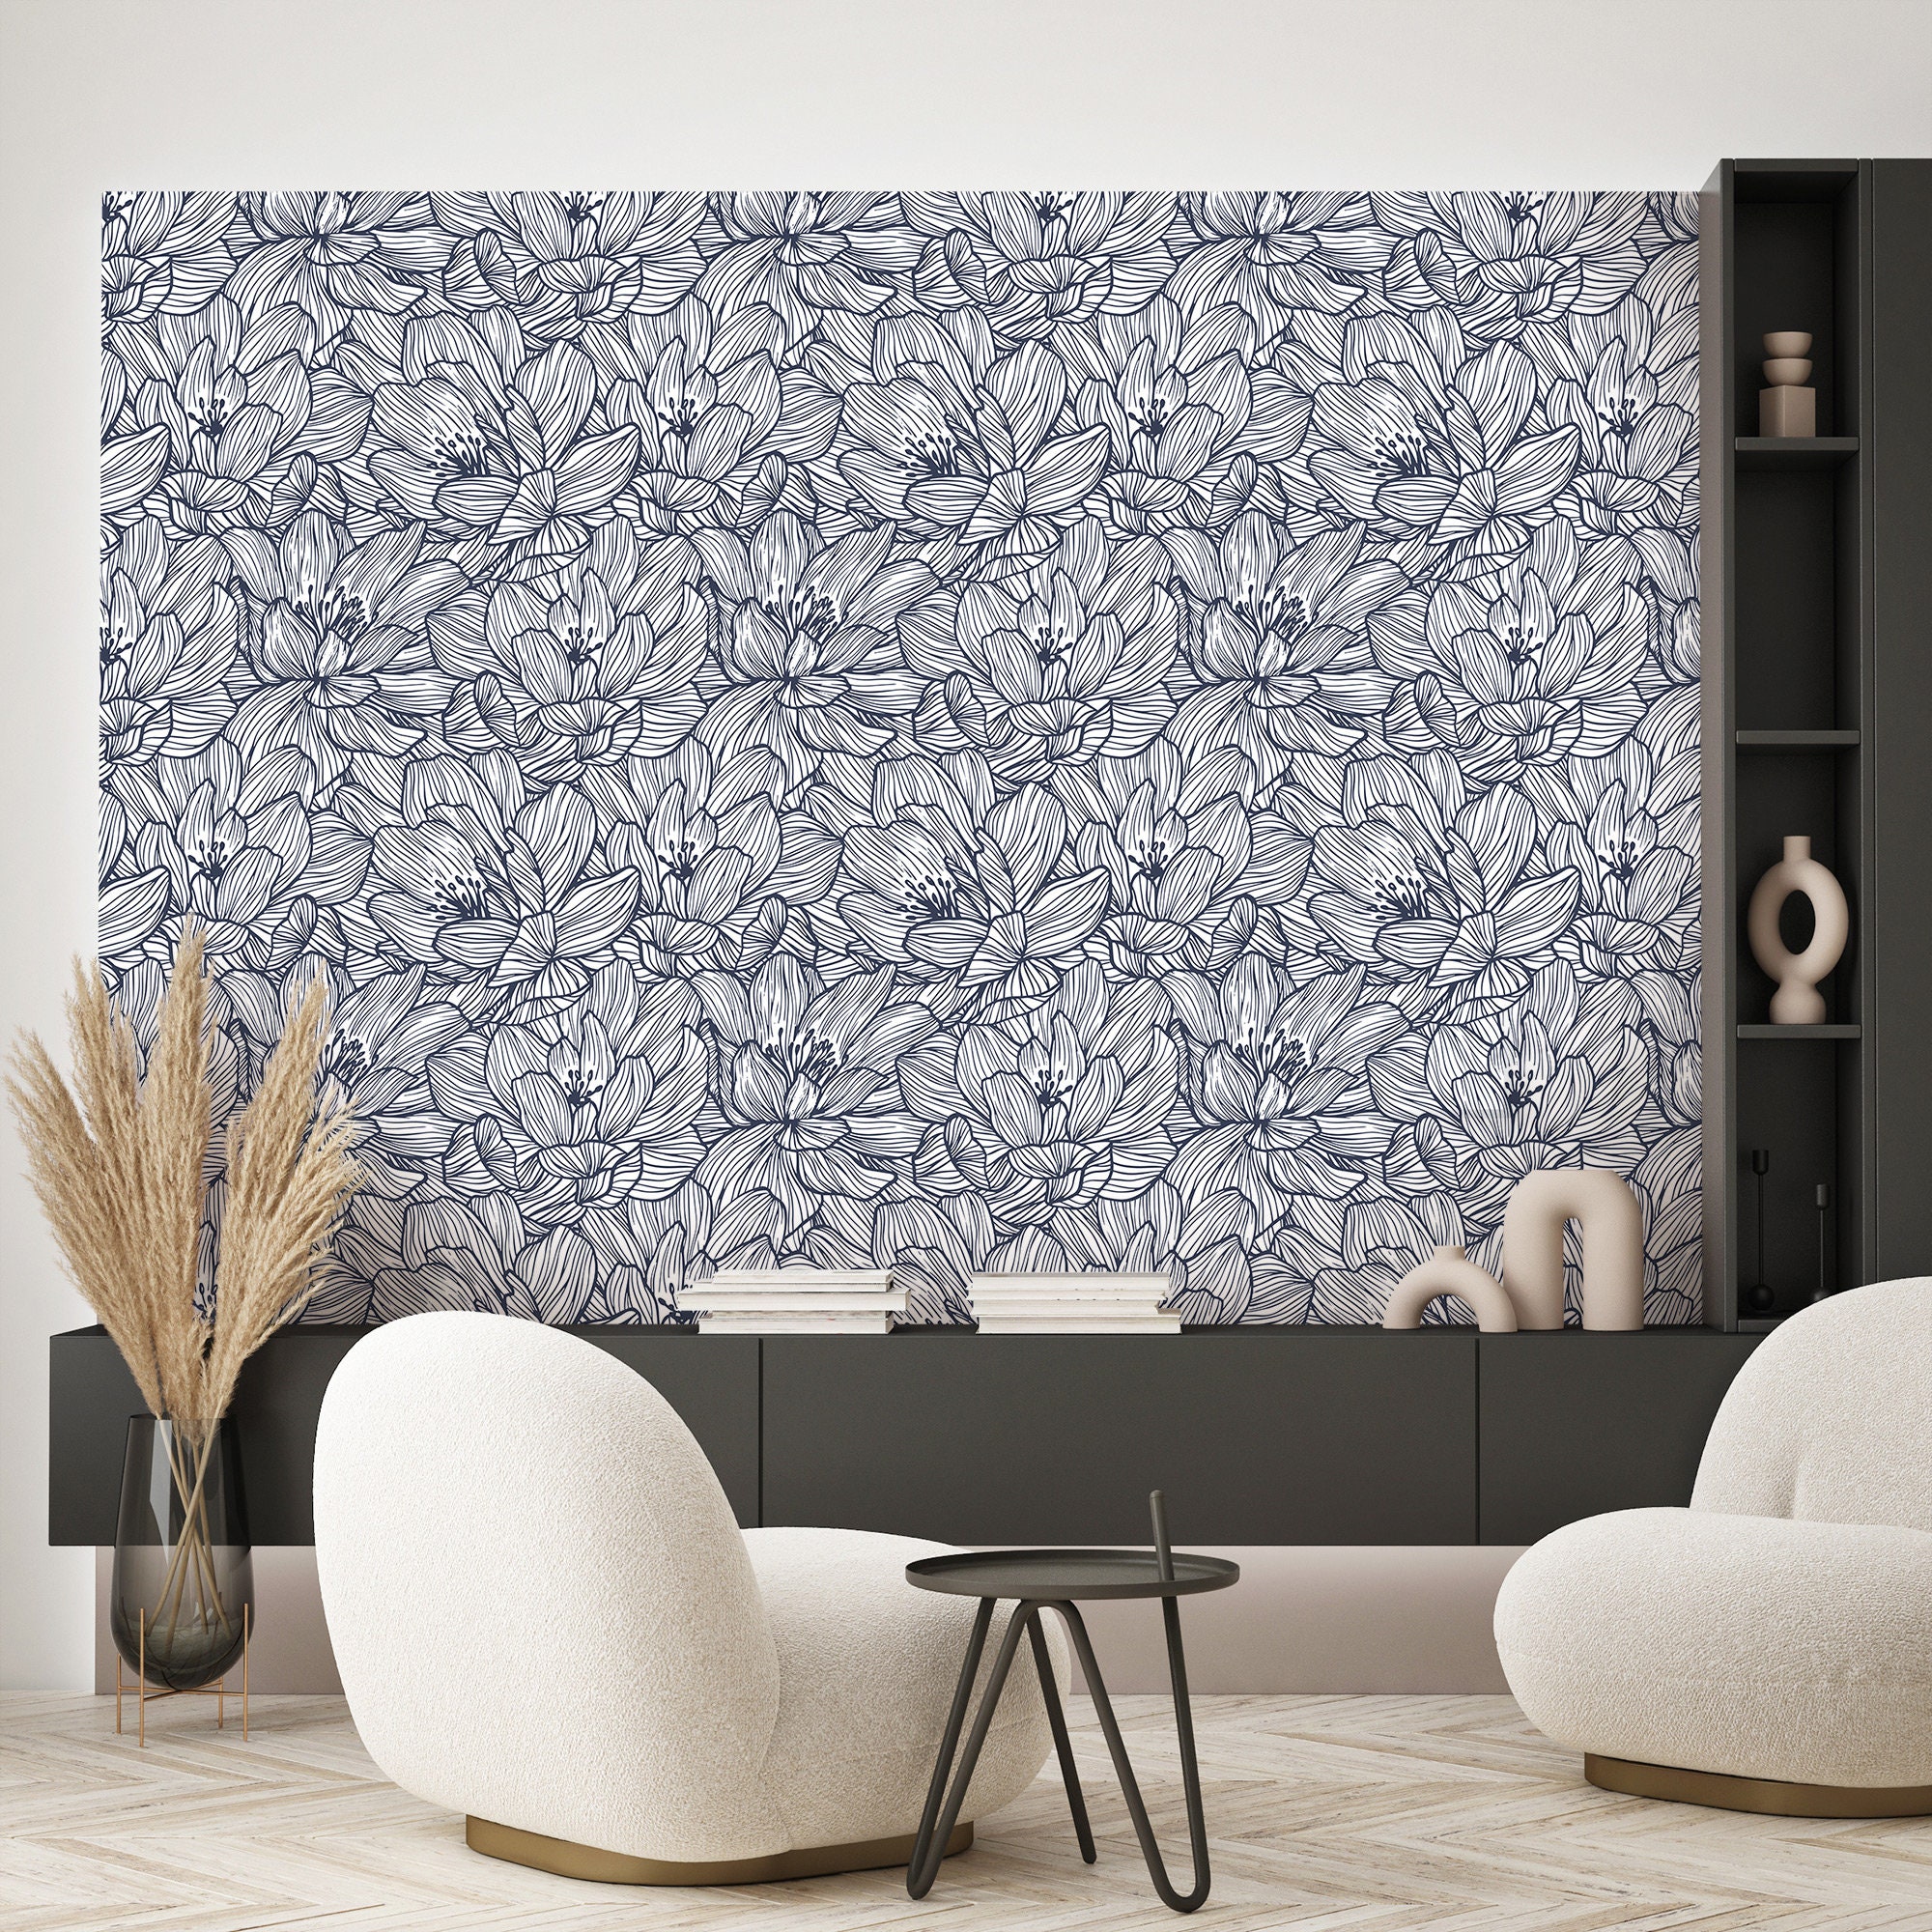 LINED FLOWERS Navy-wall Decor Luxury Floral Wallpaper Roll - Etsy